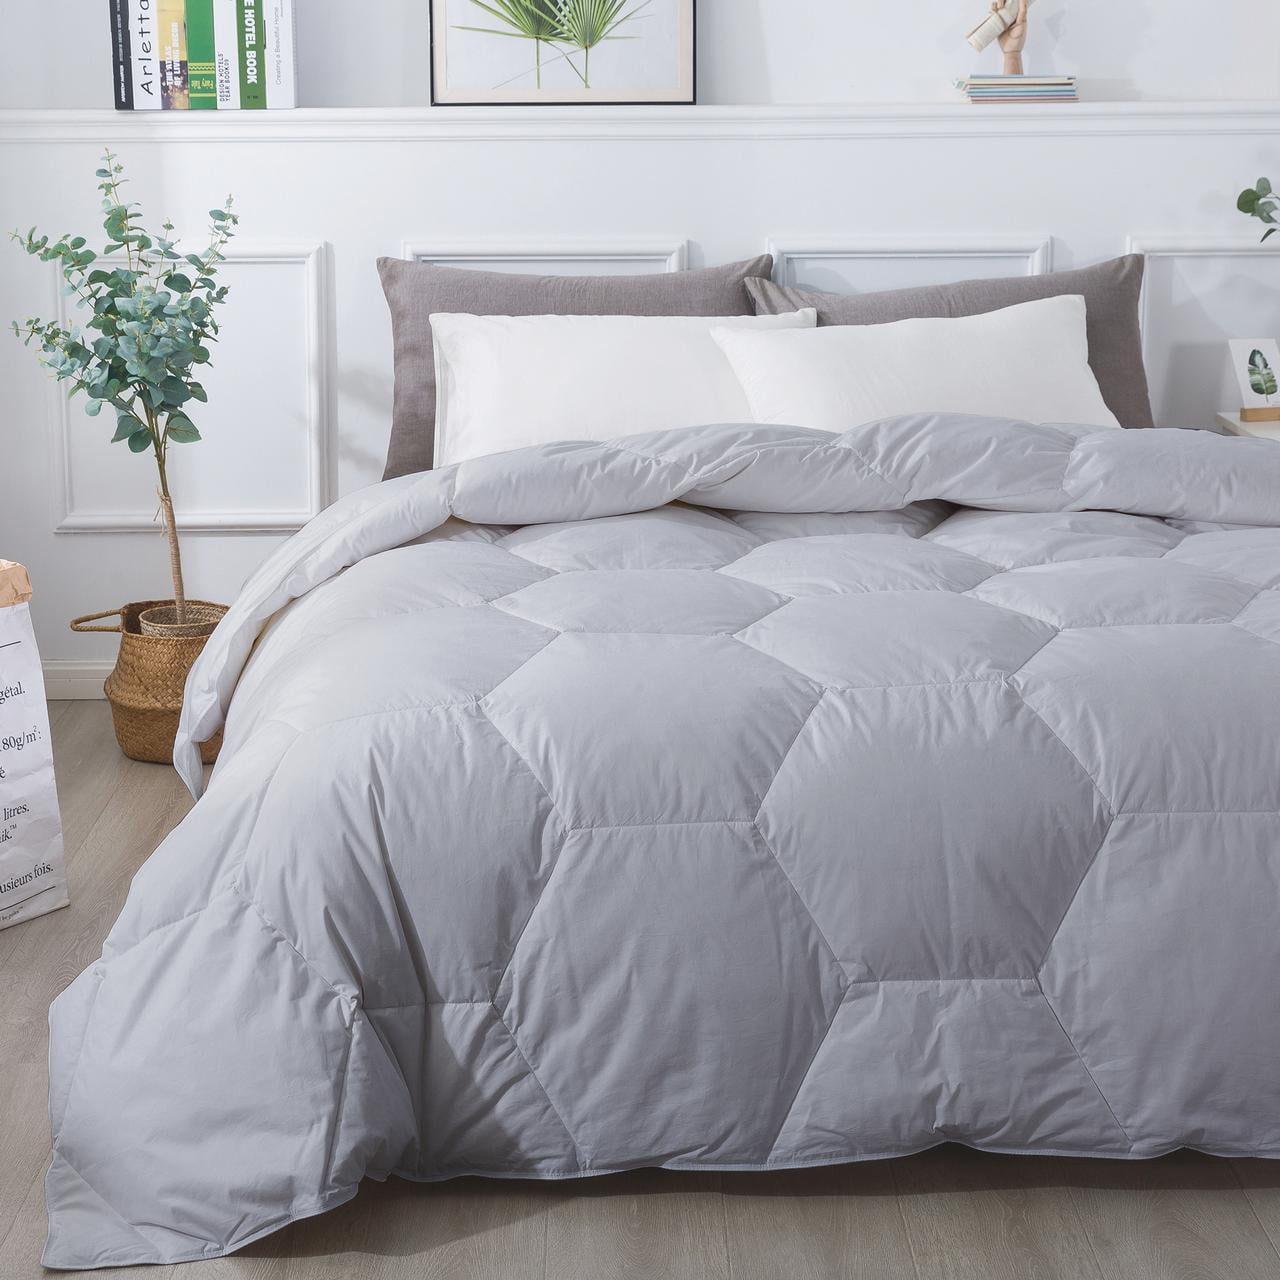 Details about   Cotton Down Comforter Quilted Polyester Filling Hypoallergenic Duvet Comforter 